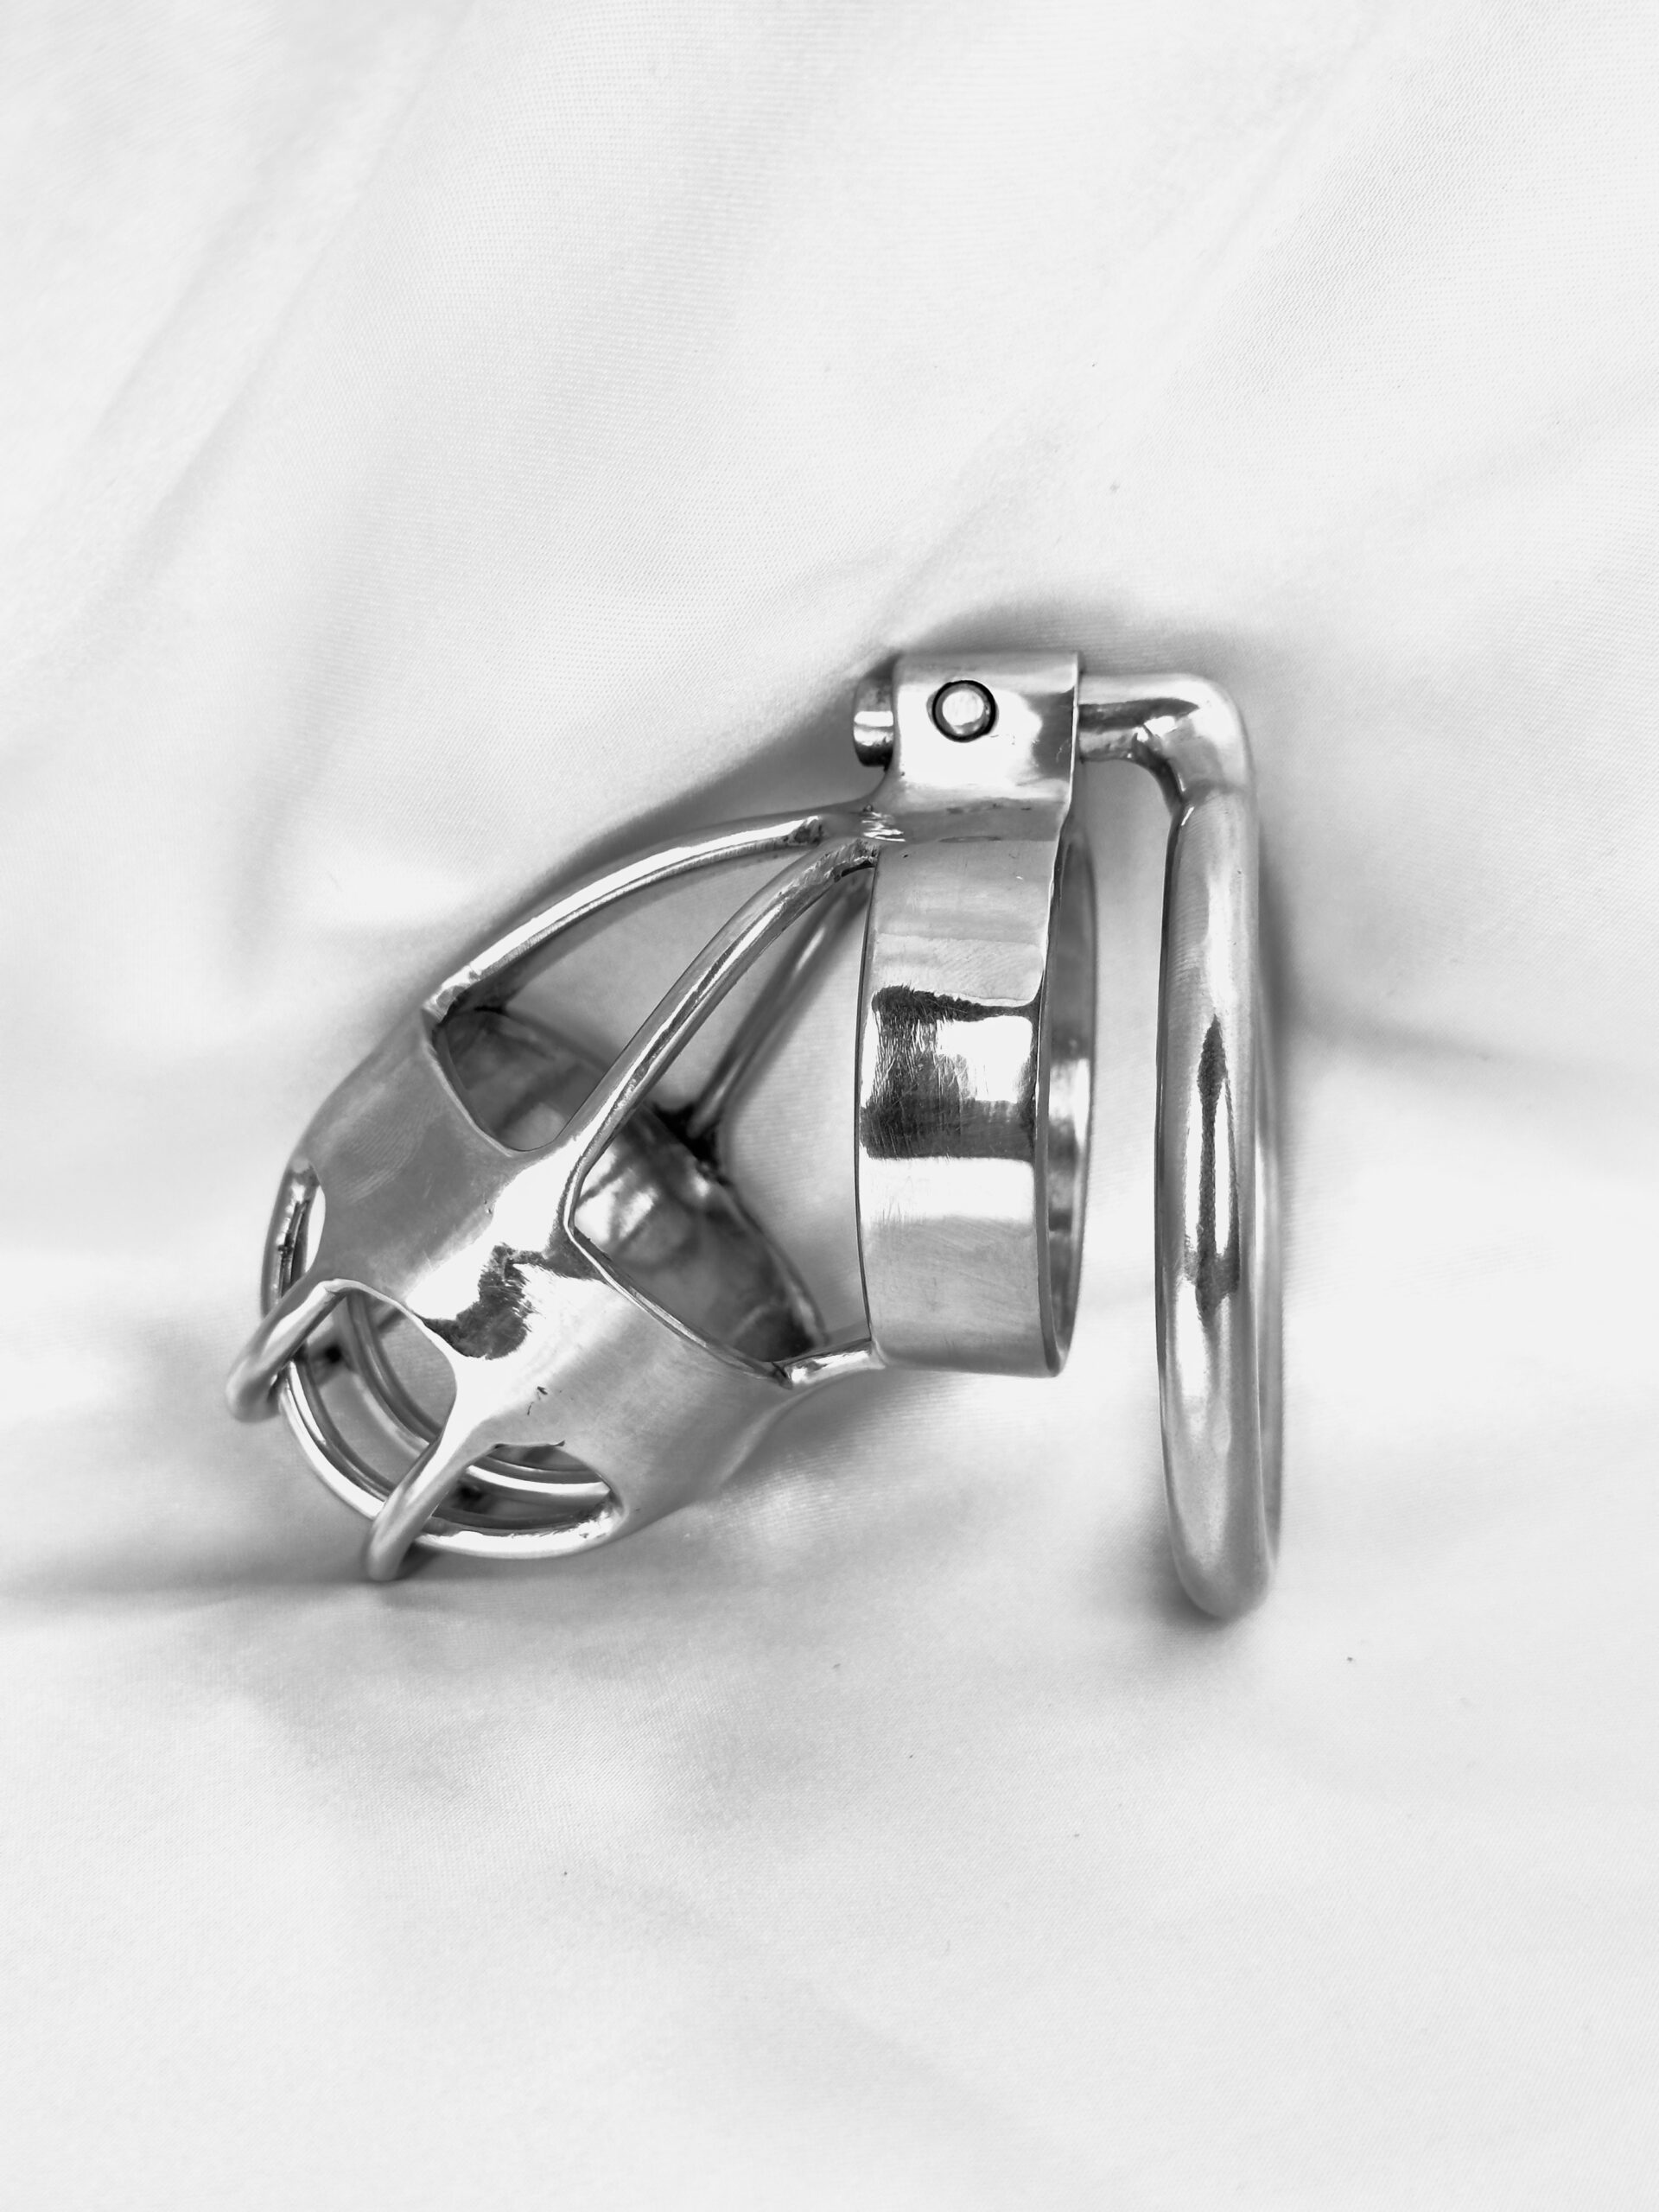 Customizable Spiked Chastity Cage For Punishment